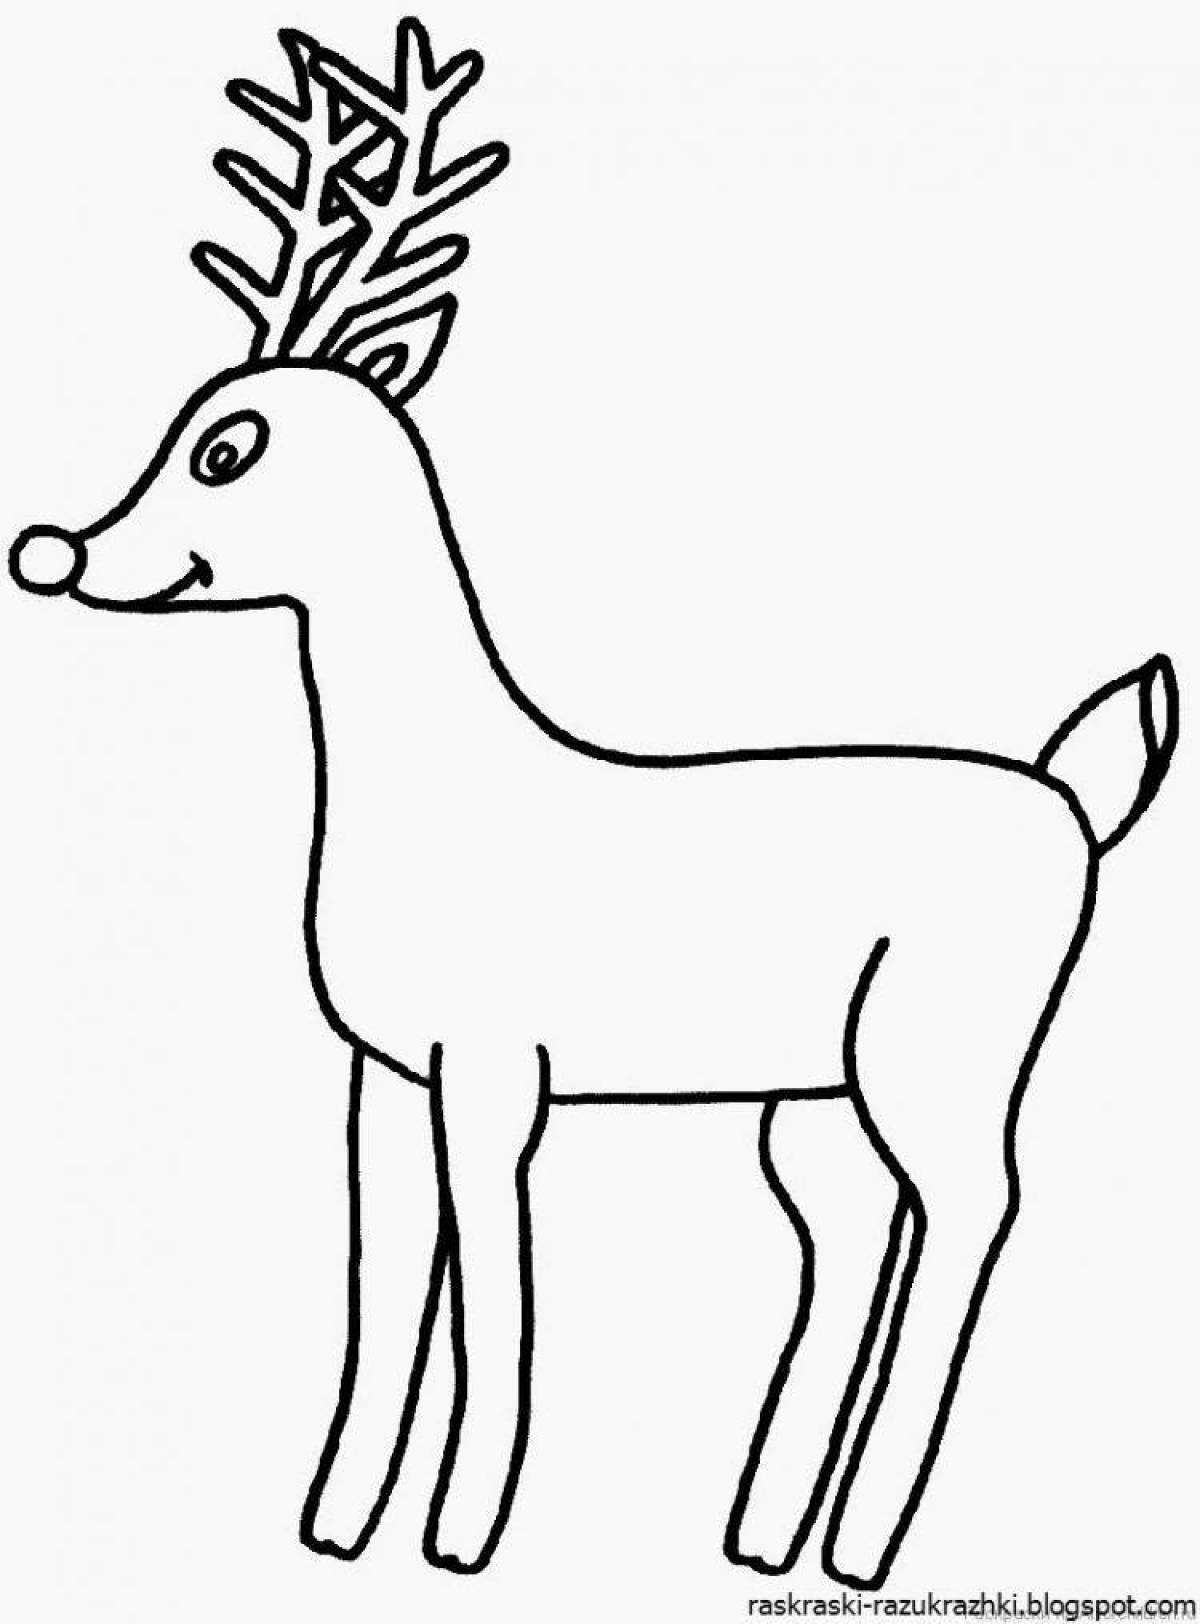 Playful reindeer coloring page for kids